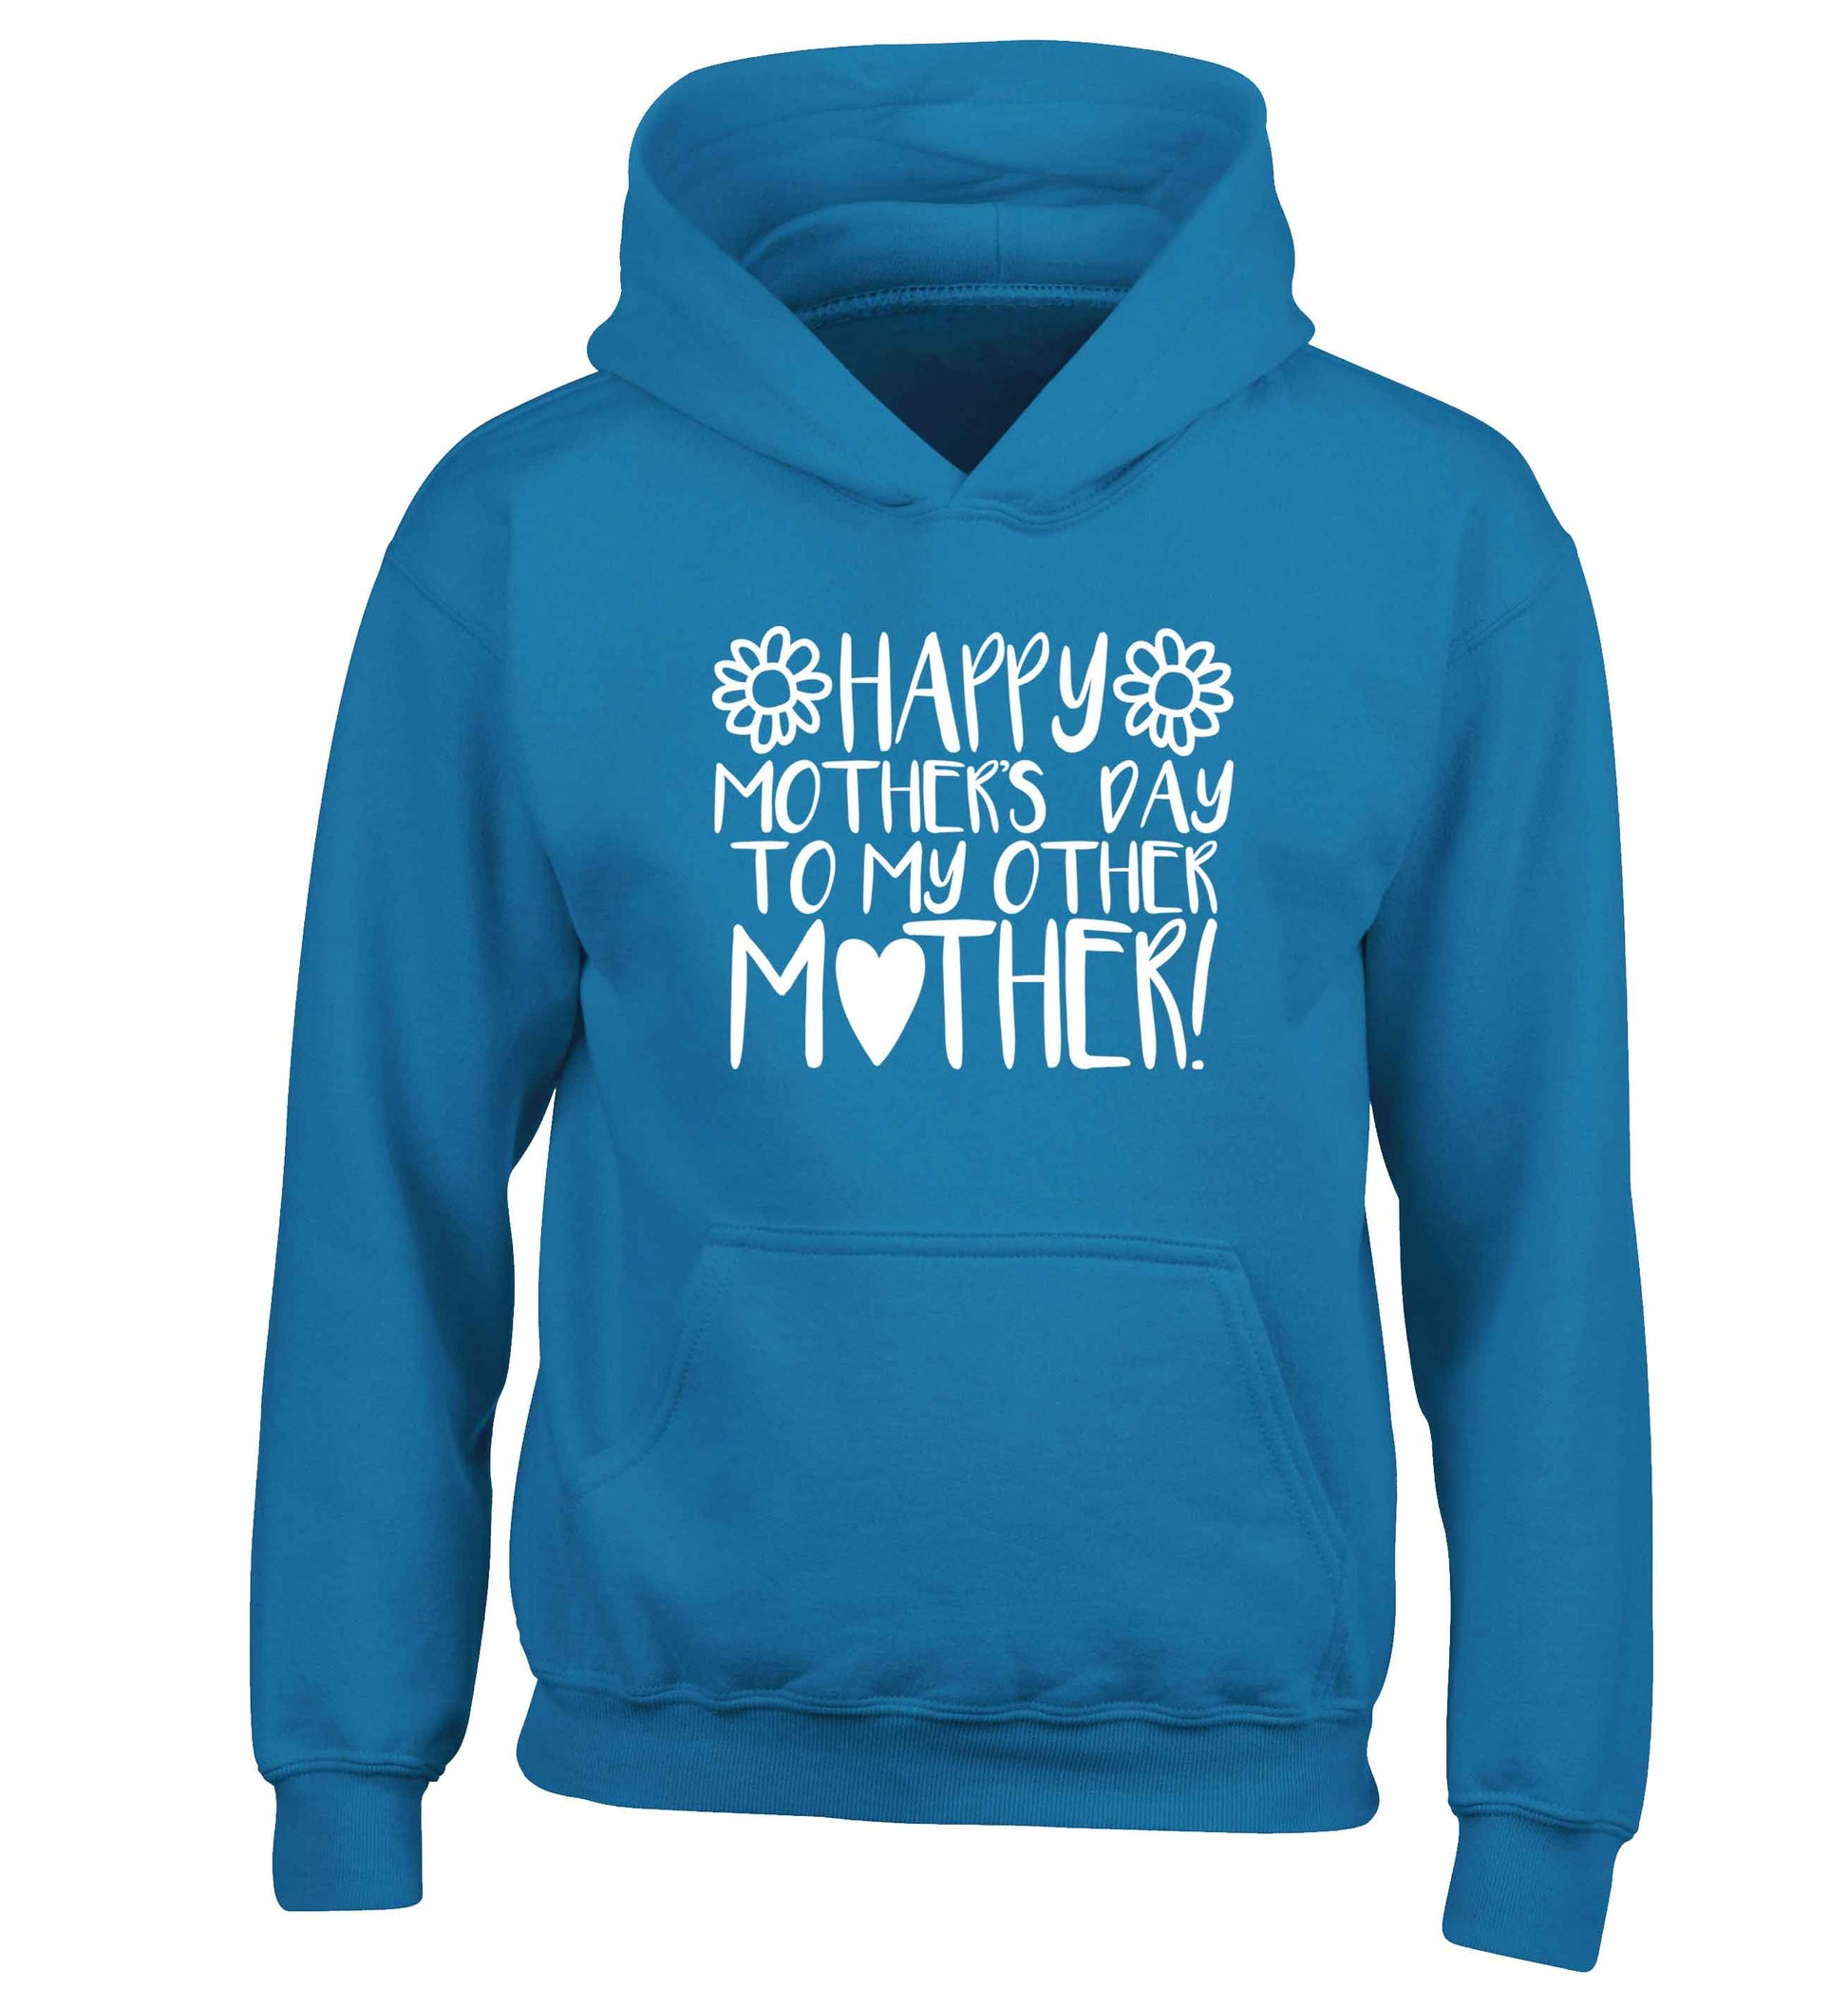 Happy mother's day to my other mother children's blue hoodie 12-13 Years